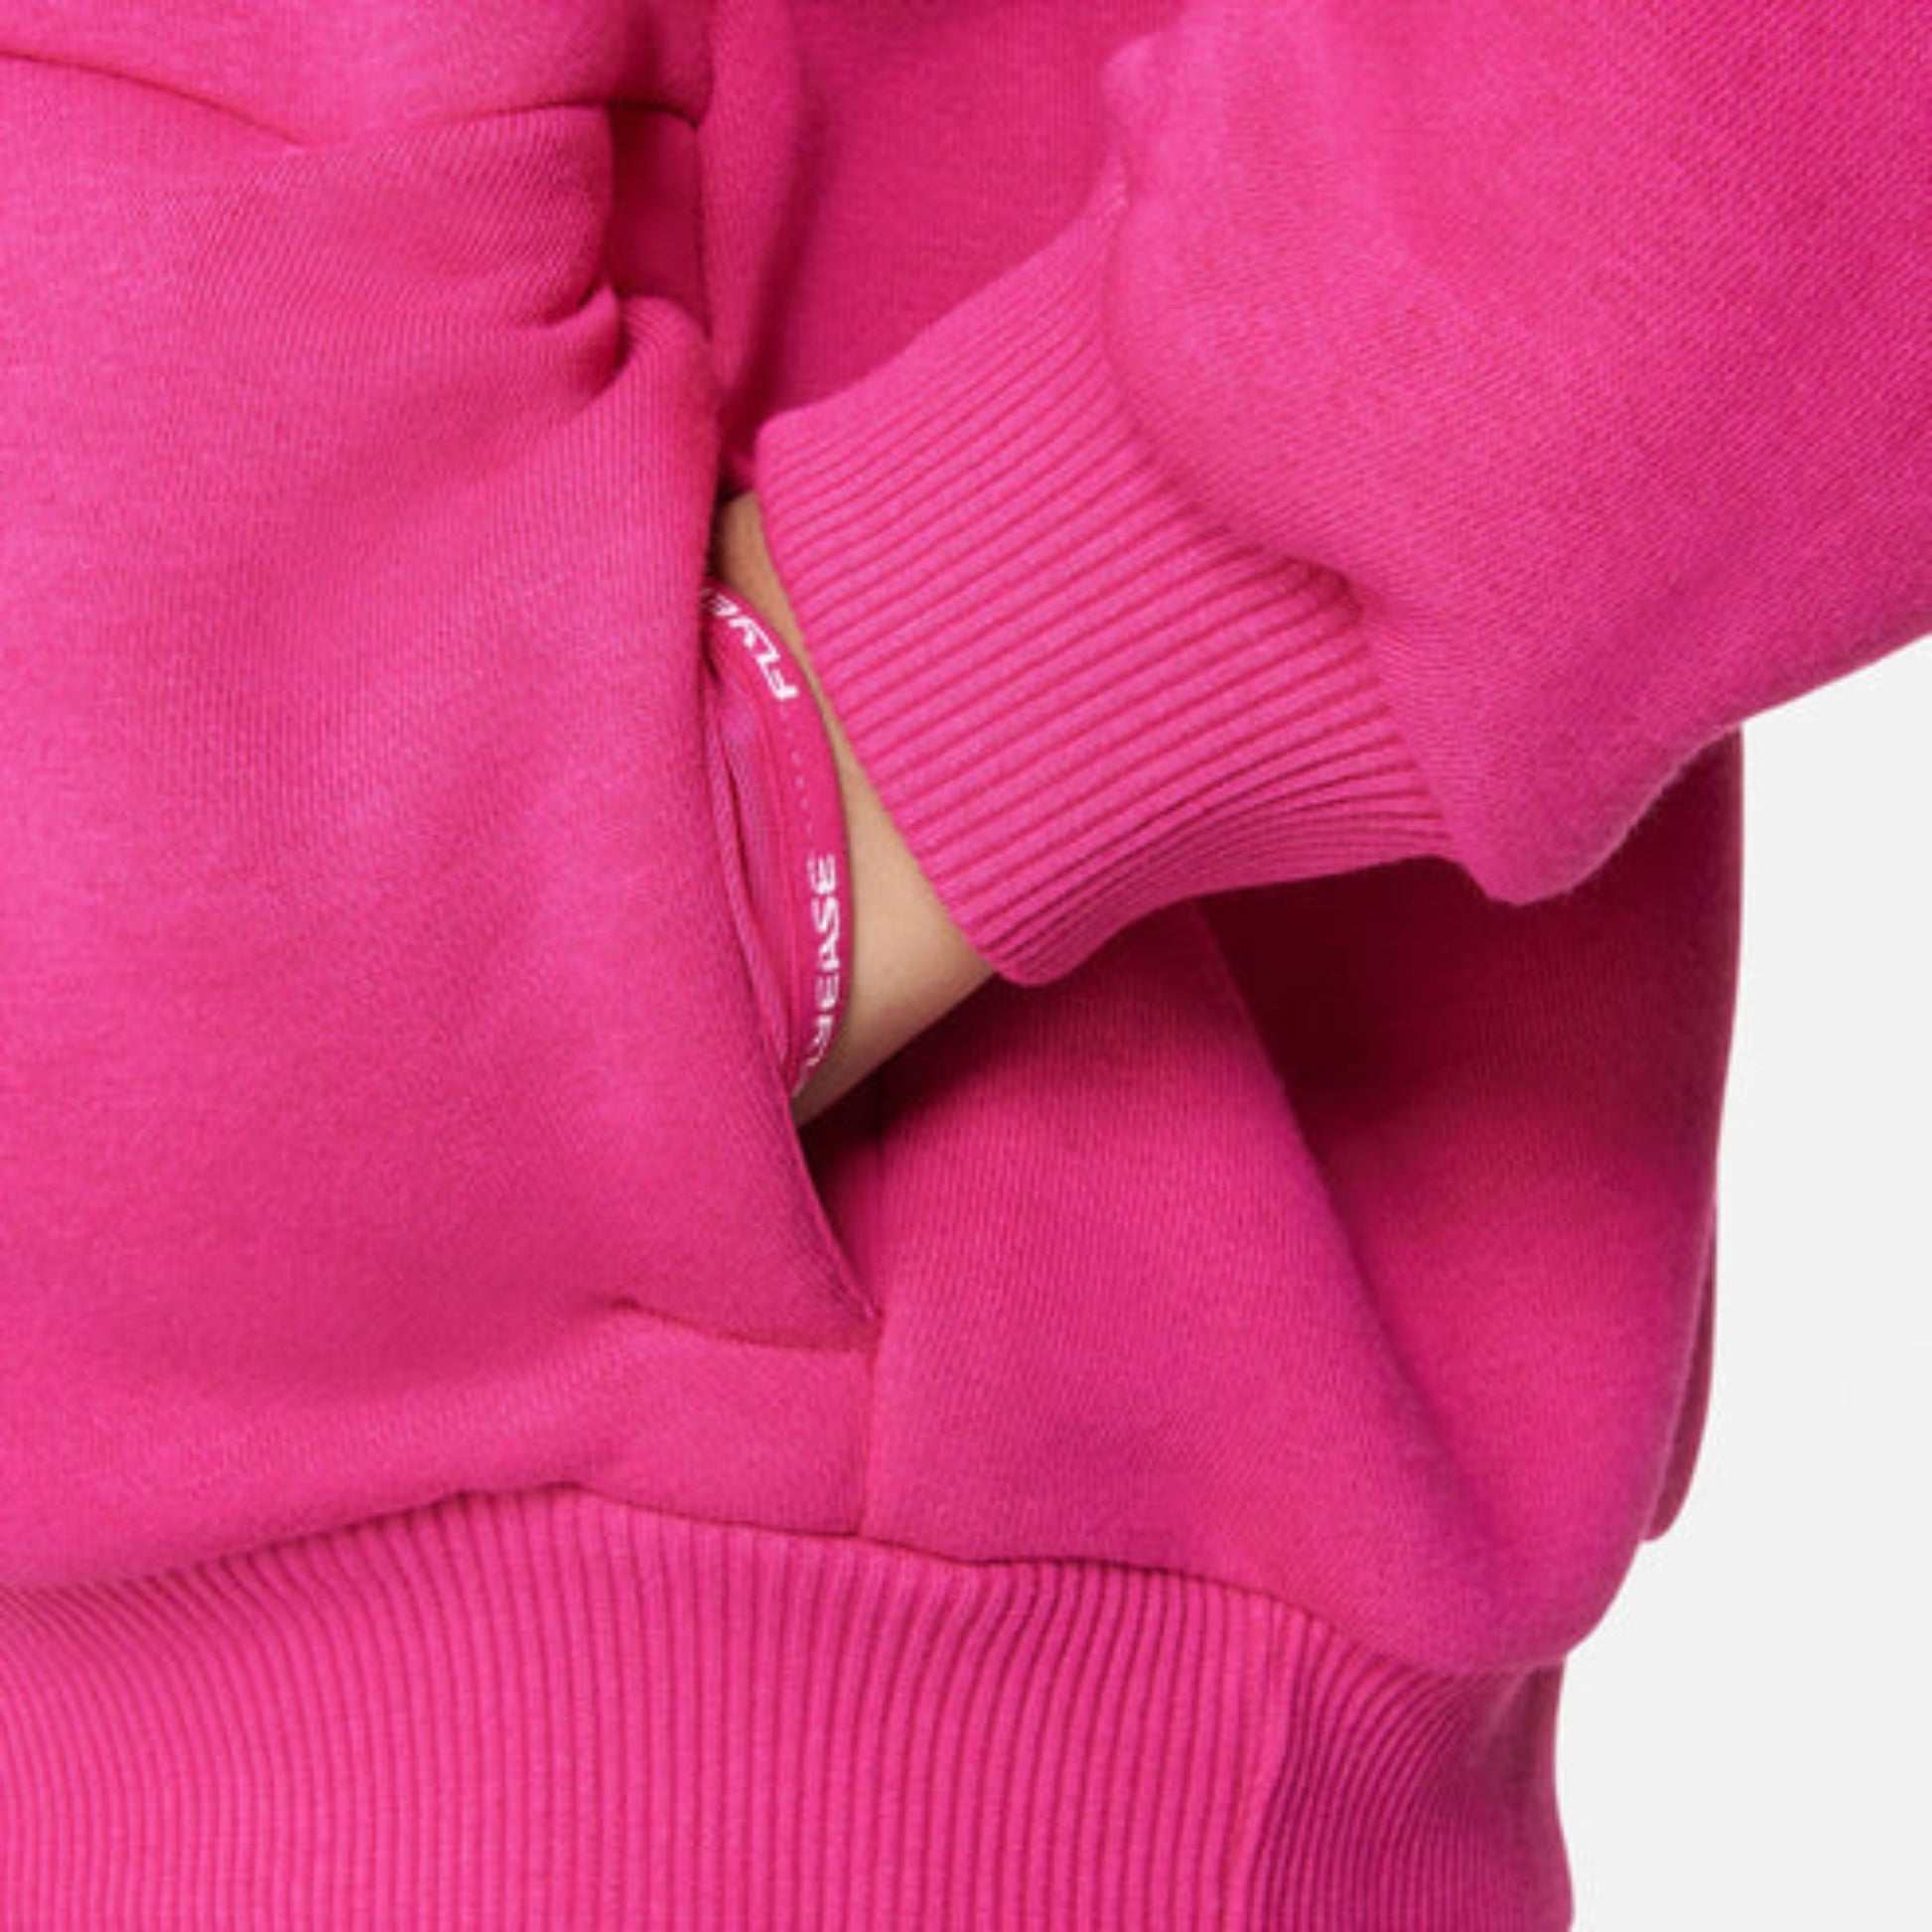 a close of a pink hoodie